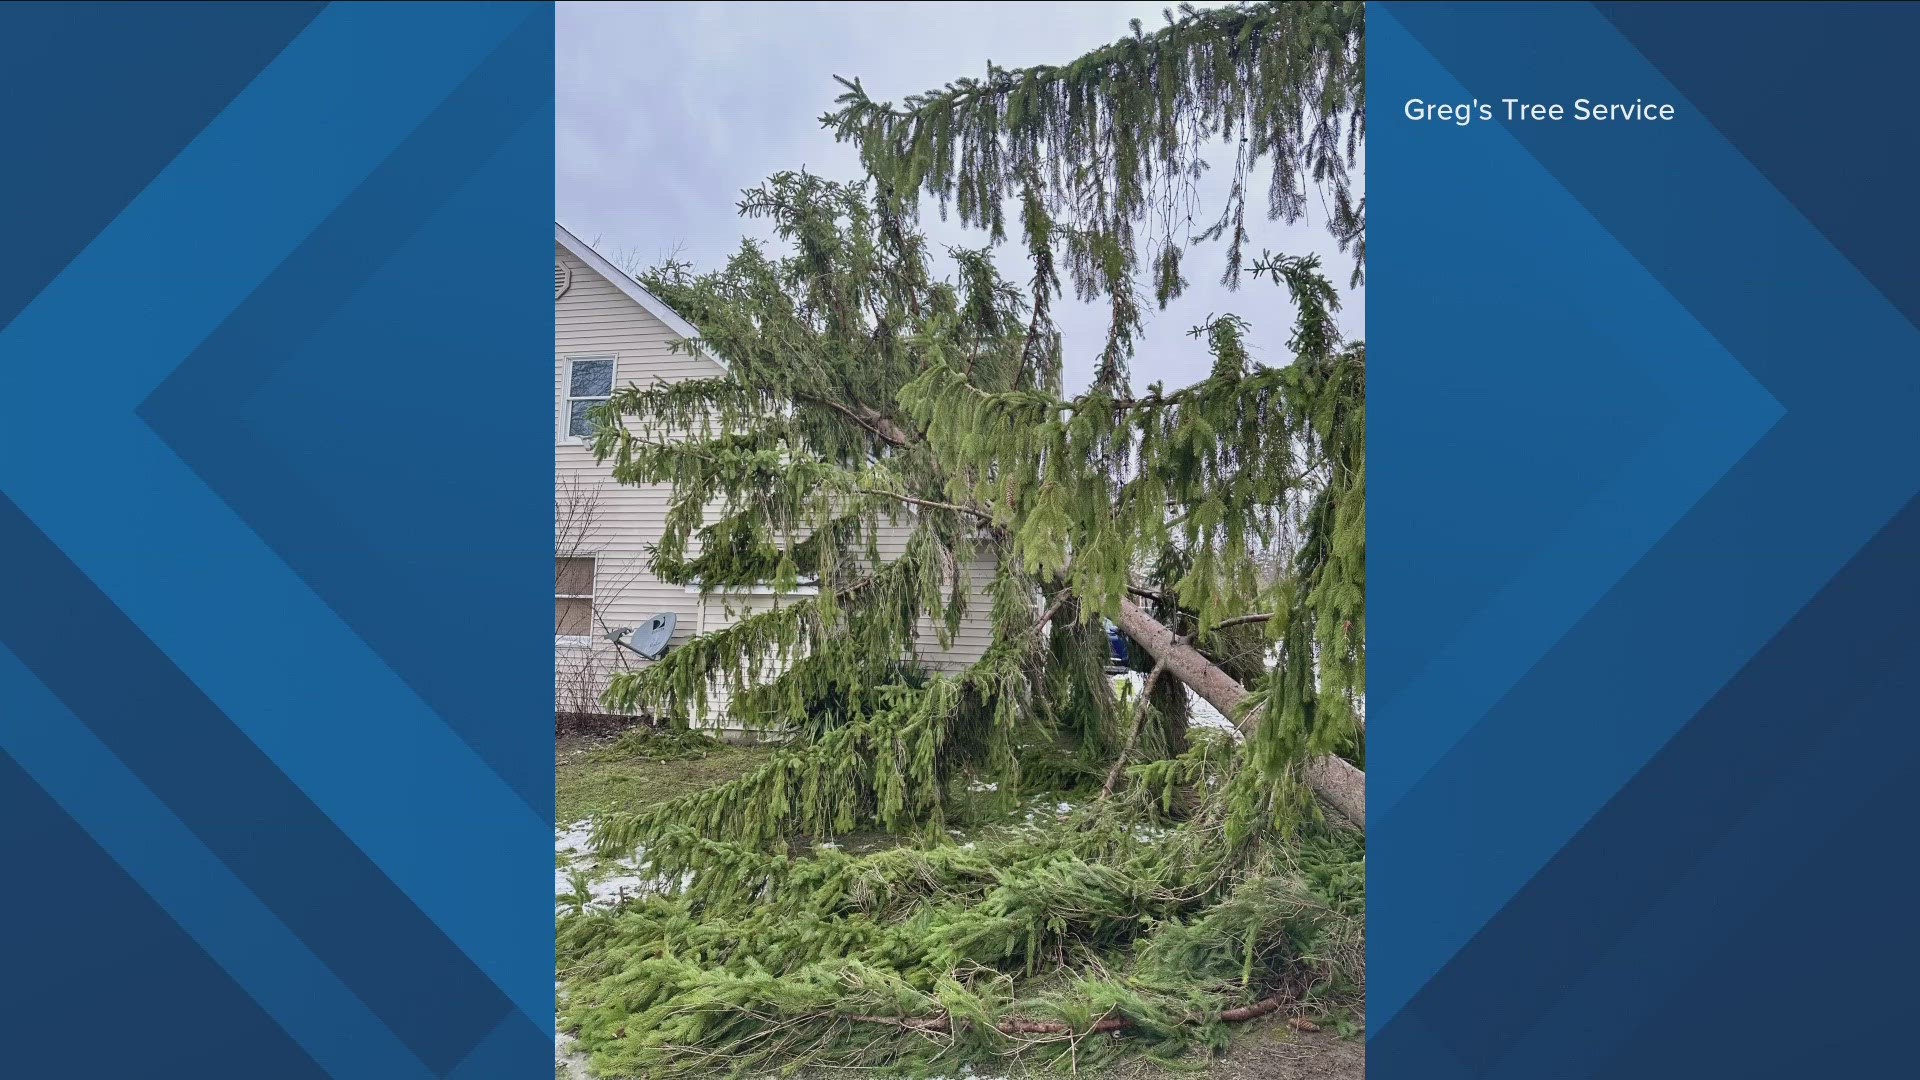 Many WNY homeowners are dealing with downed trees, many due to shallow root systems and the soft, wet ground around them.